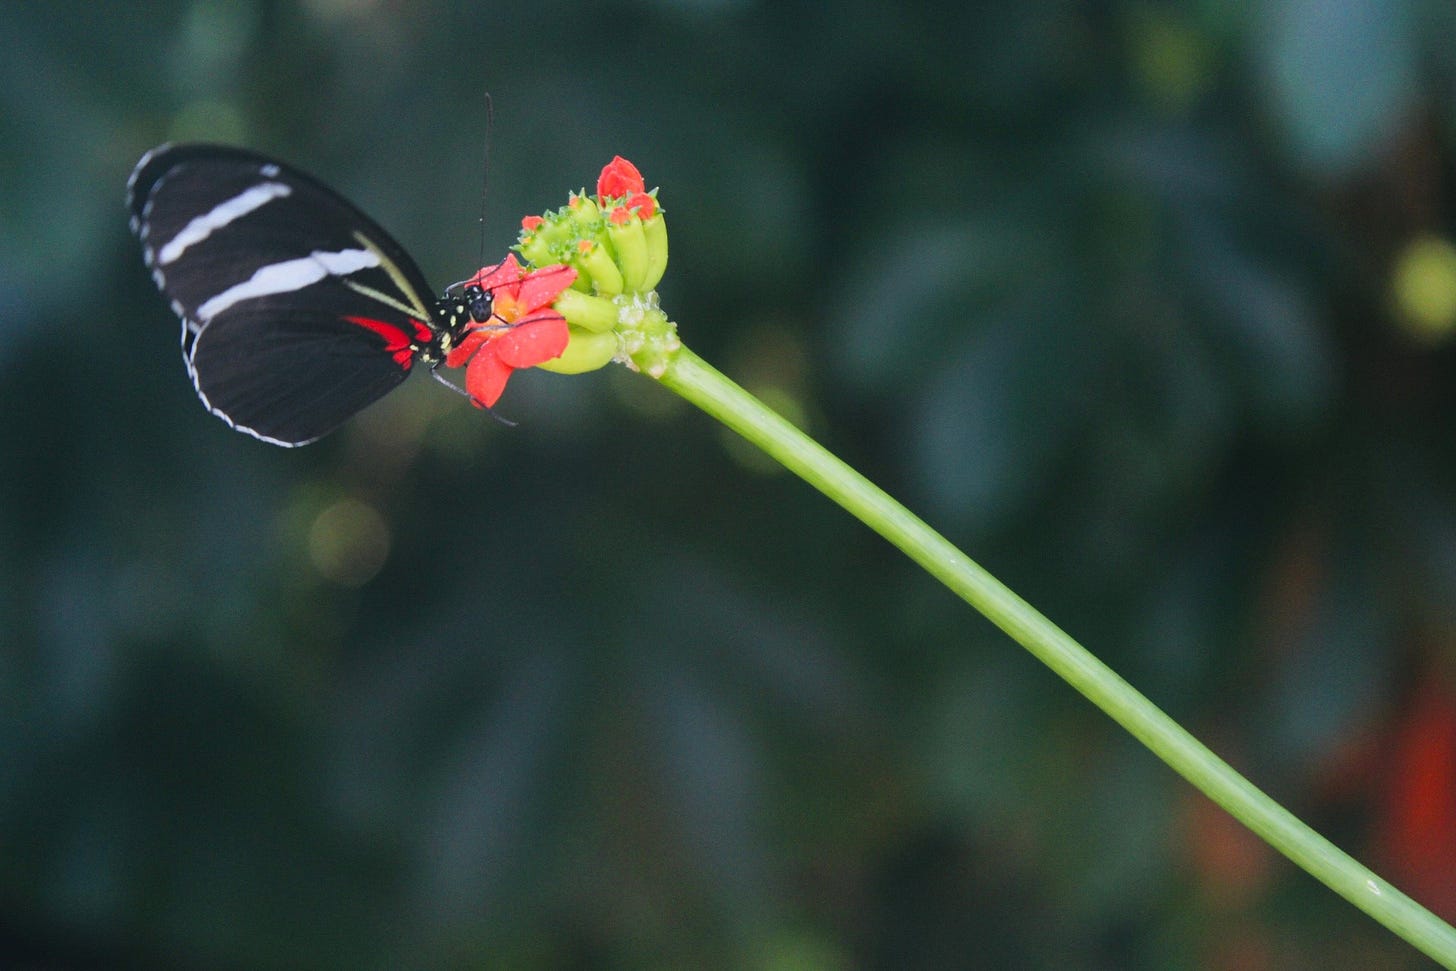 A black and white butterfly perches on a tiny flower at the end of a long green stem